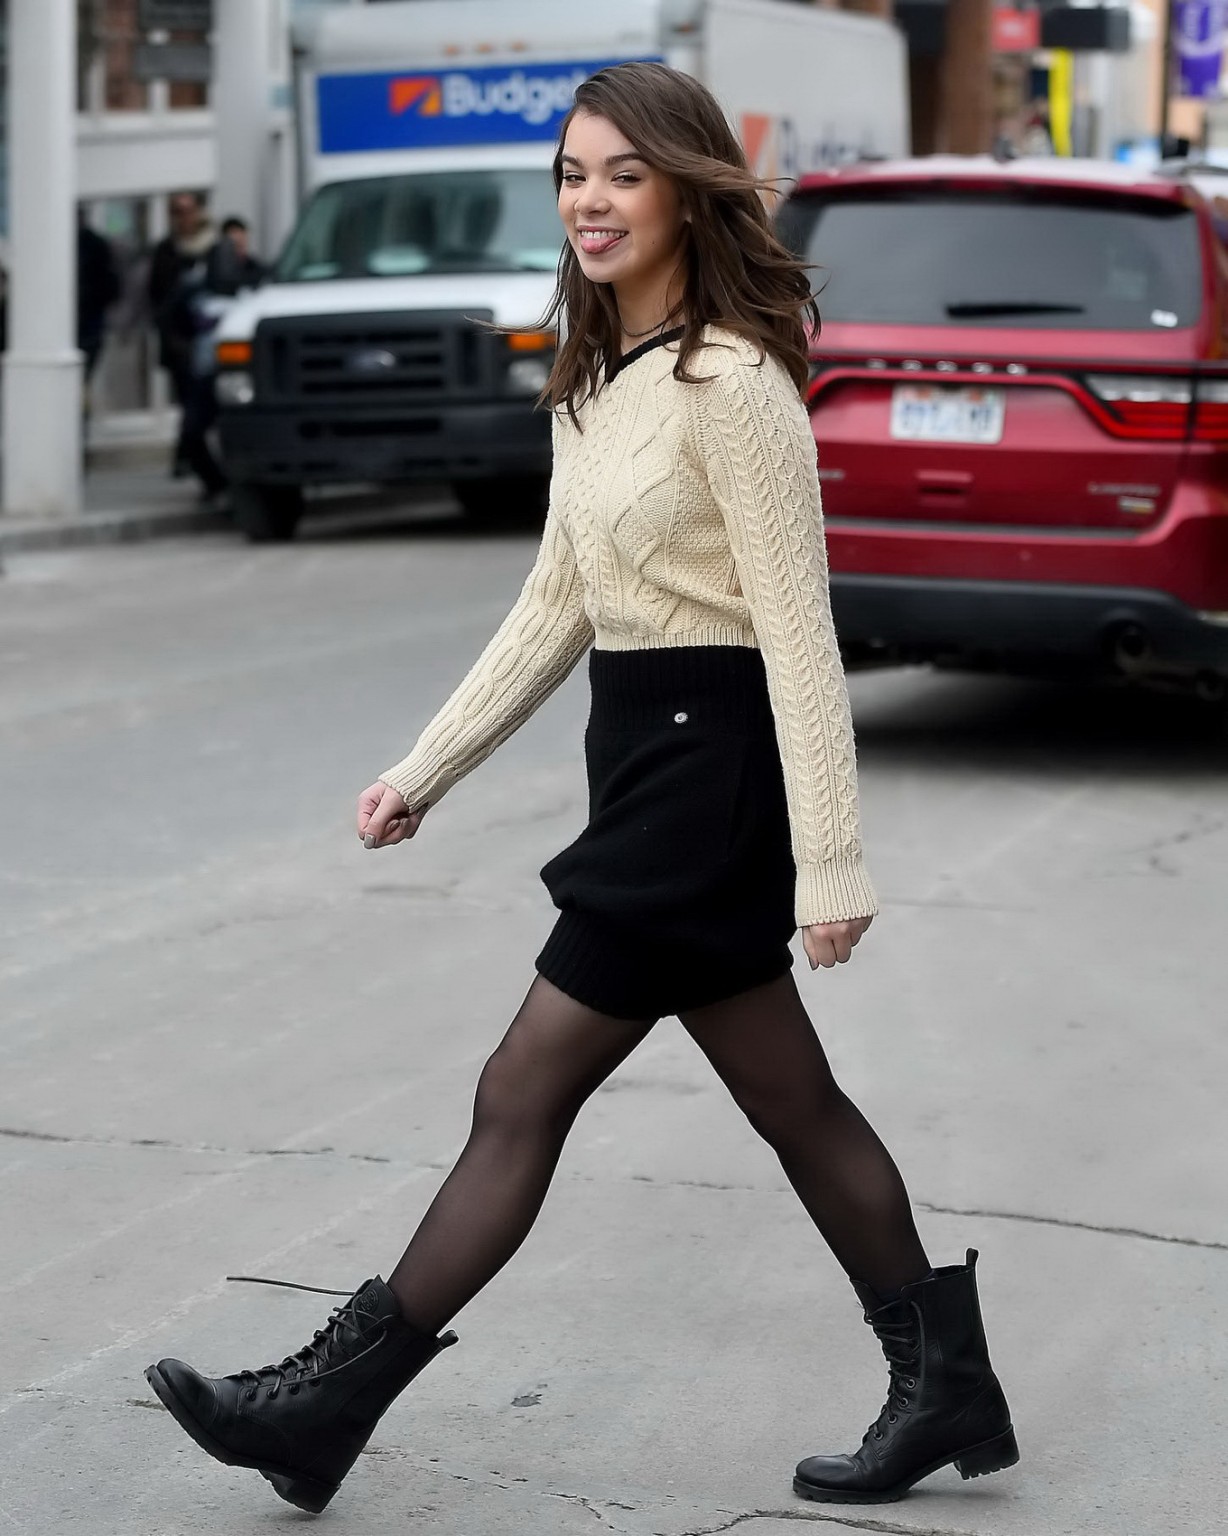 Hailee Steinfeld leggy wearing mini skirt and pantyhose out in Park City #75174538